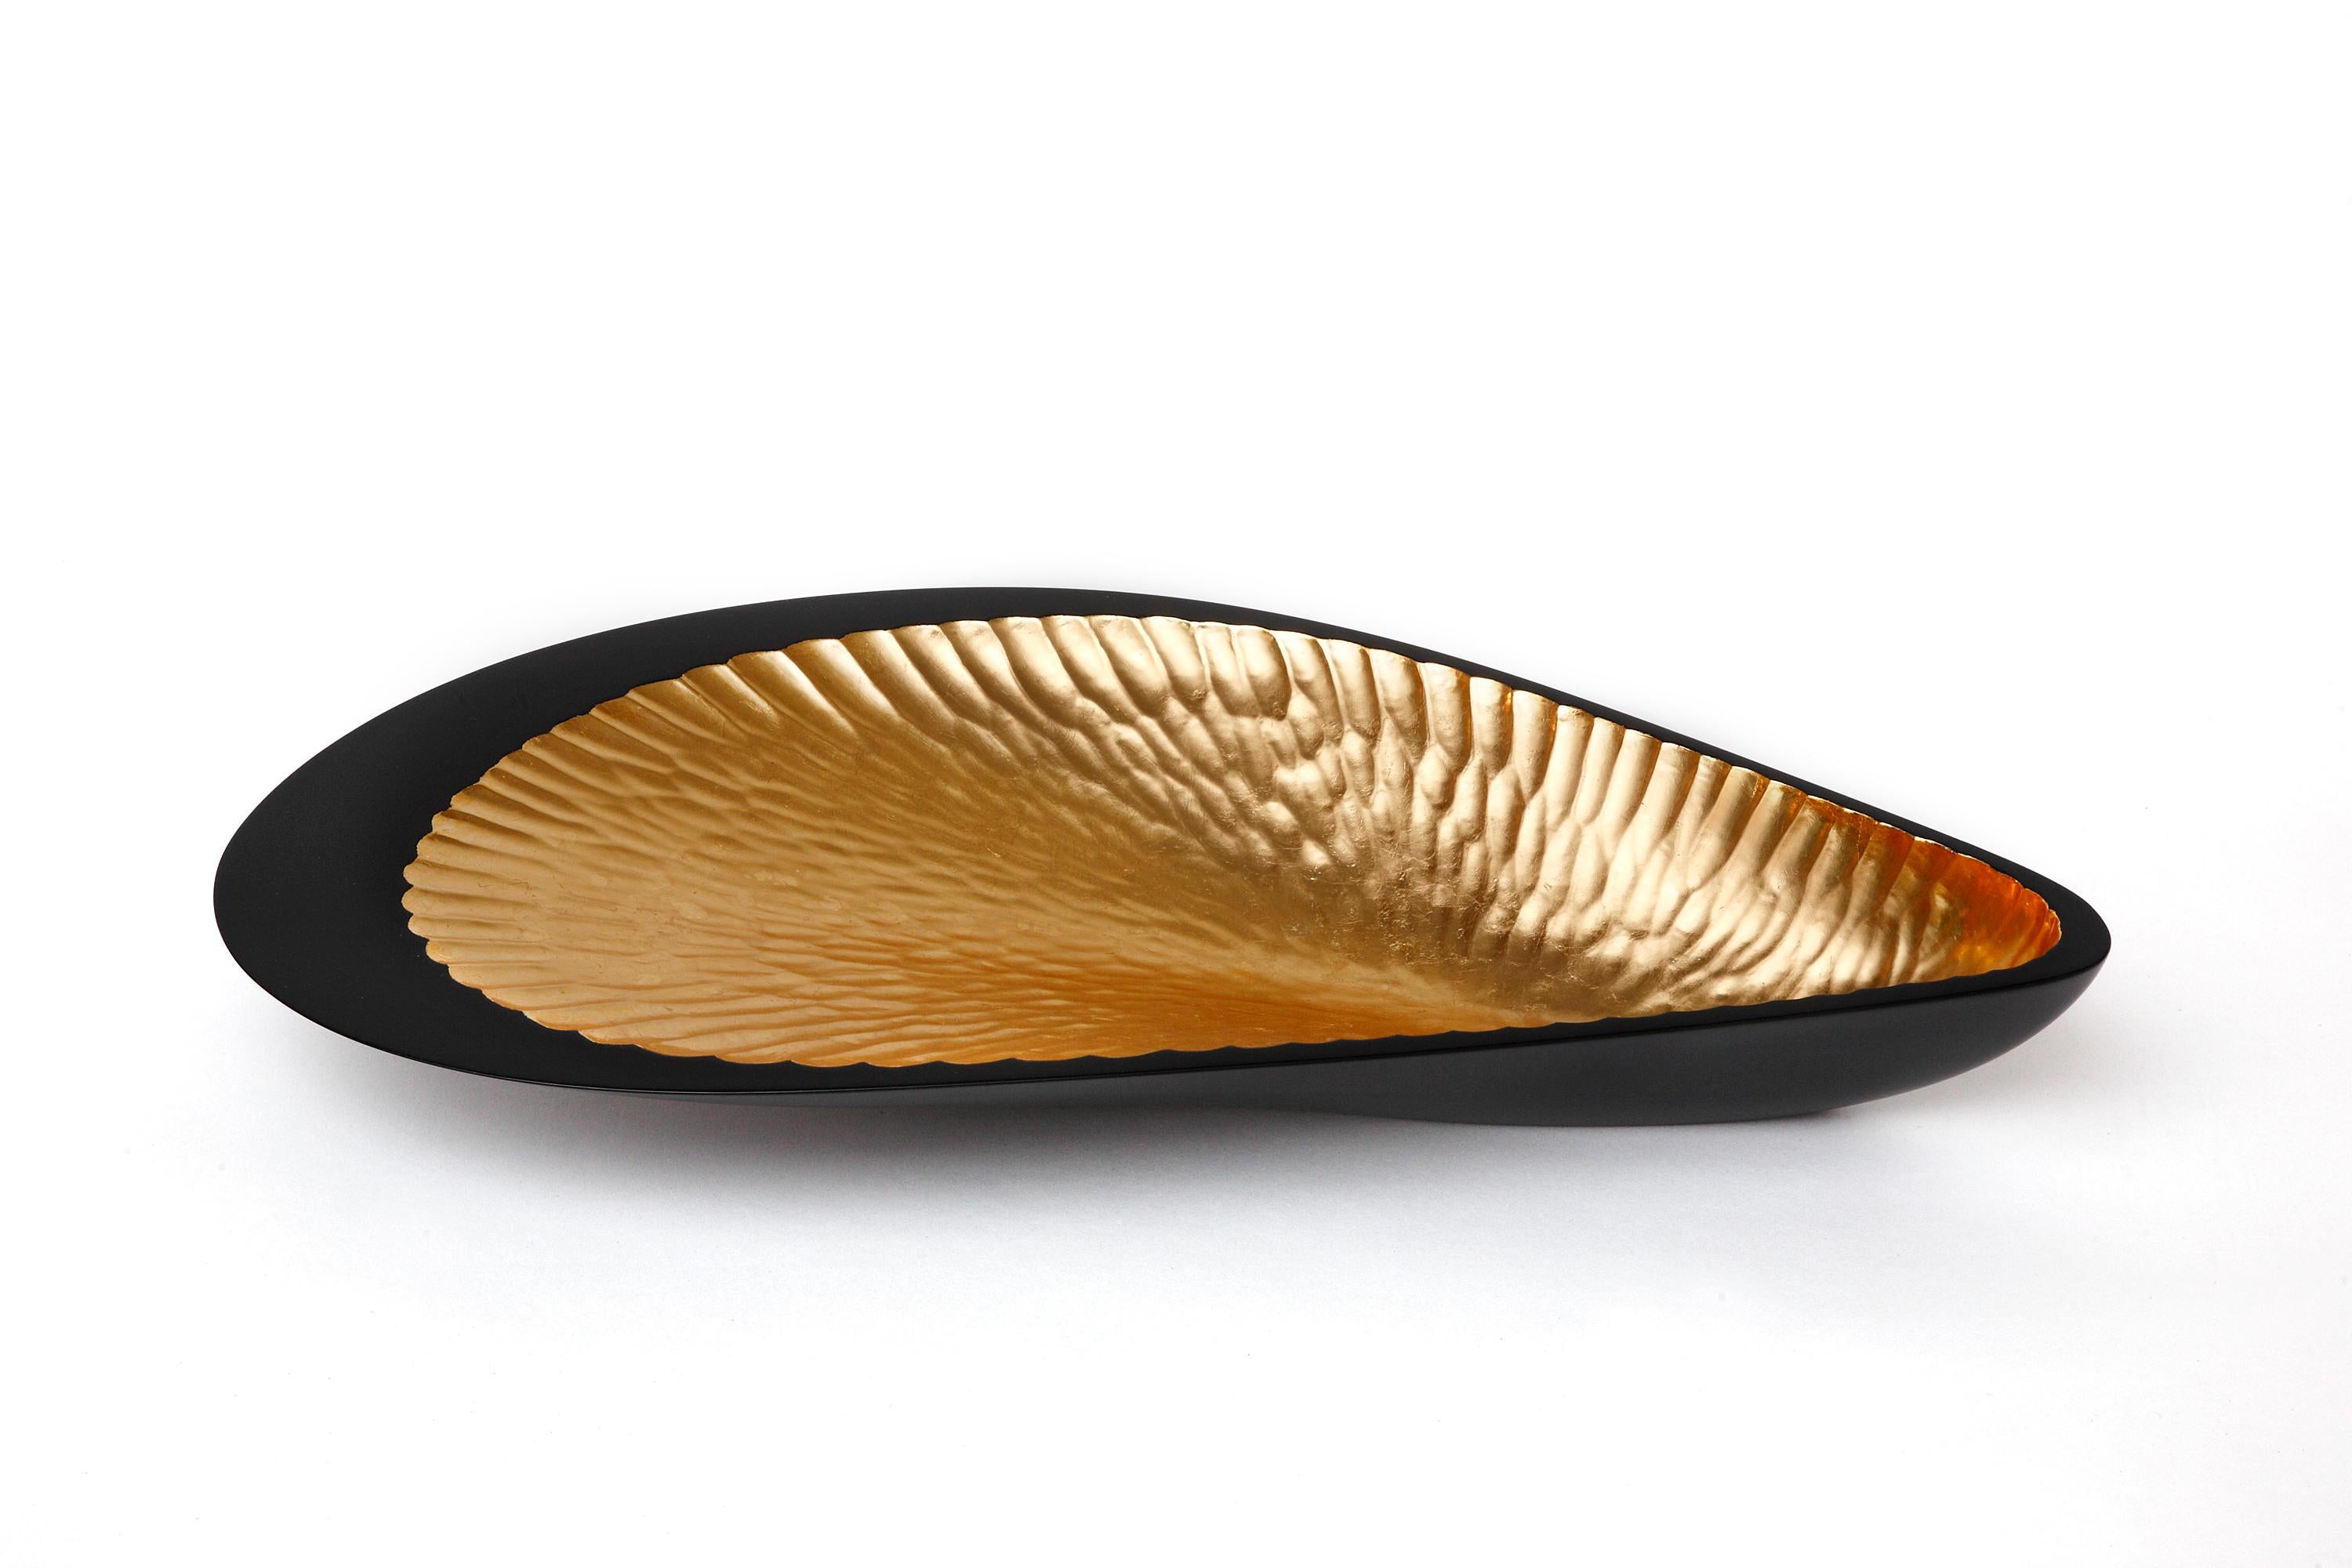 Shell sculpture in the shape of mussel made of lacquered lime wood and gold leaf. Influenced by early 20th century masters such as Majorelle, Gallé and Vallin, the artist takes the essence of the organic Art Nouveau curves and makes a transcendent